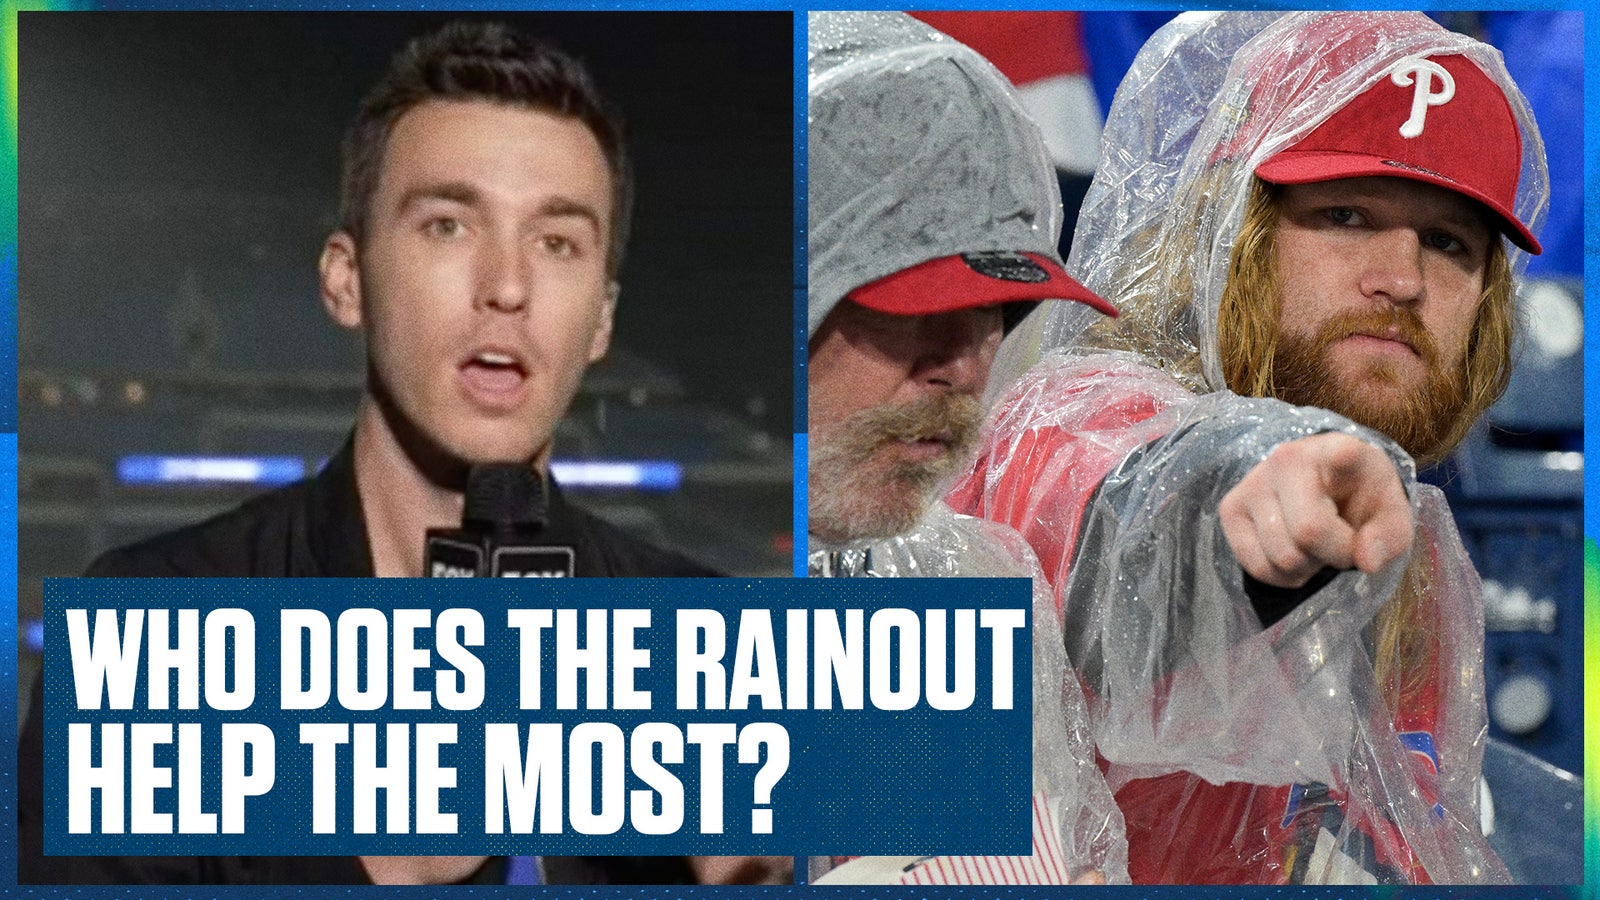 Who the rainout impacts the most for the rest of the series